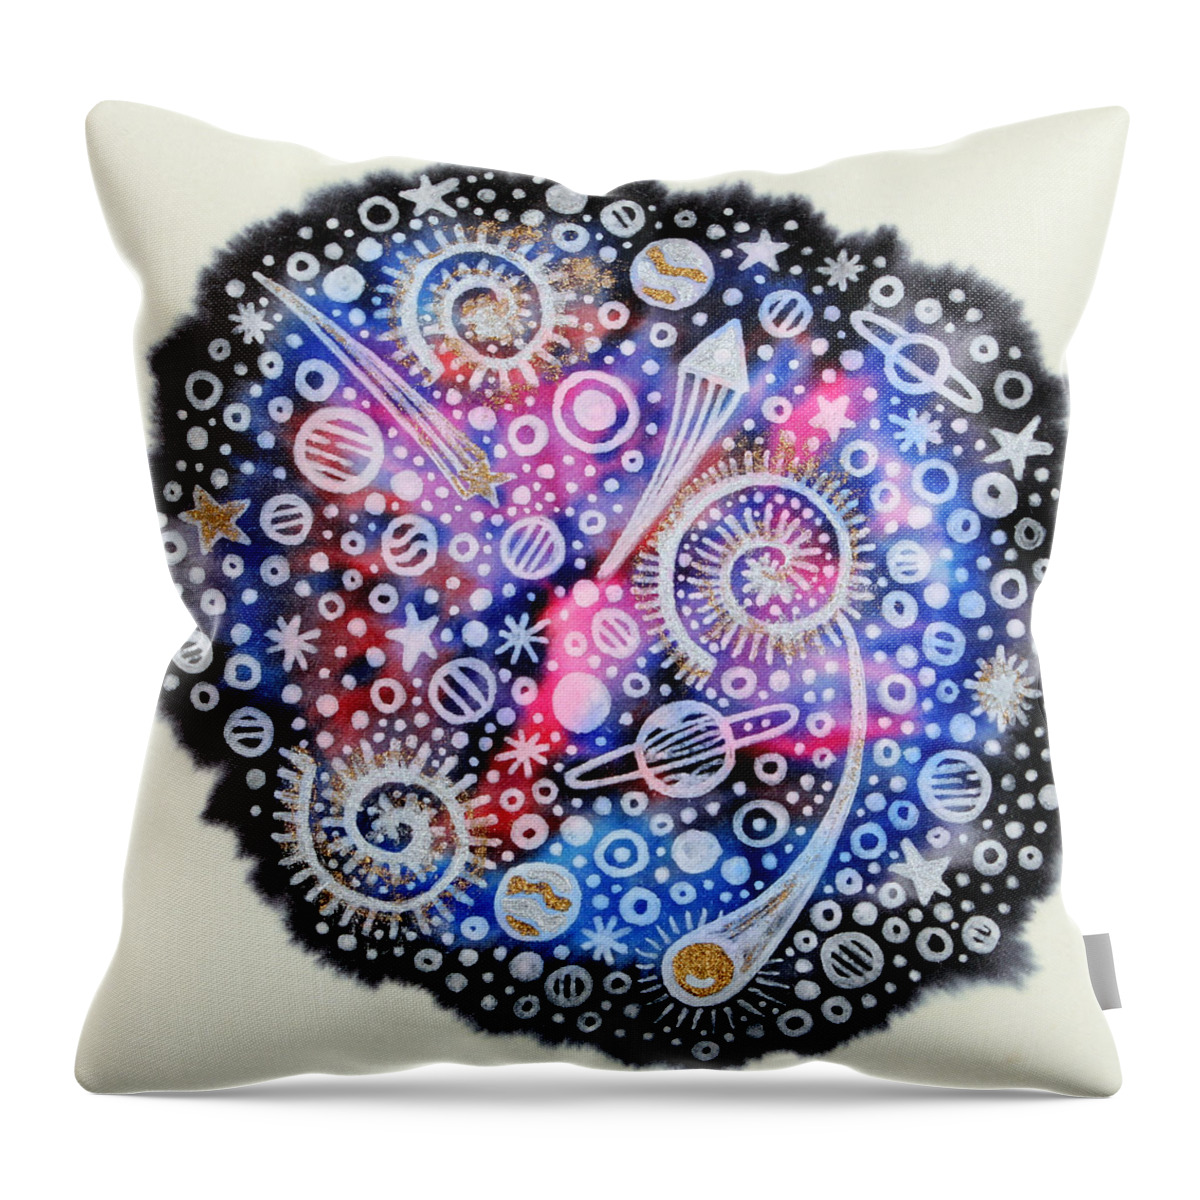 Space Cosmos Universe Galaxy Nebula Planets Comets Asteroids Ufos Shooting Stars Spirals Swirls Meteors Throw Pillow featuring the photograph No.33 by Daniel Icaza